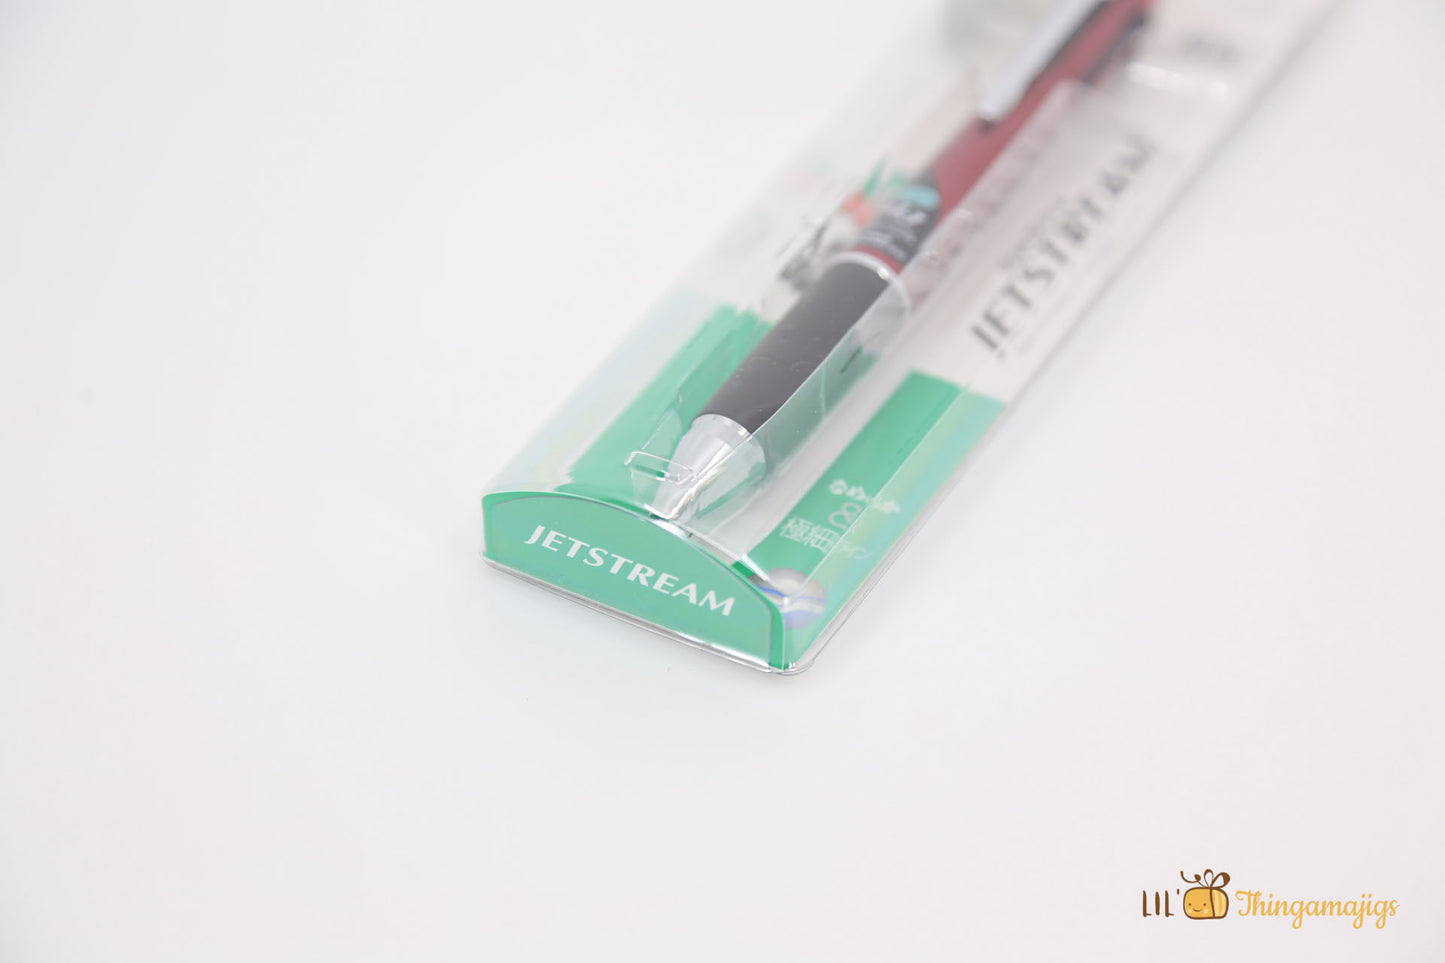 Uni - Jetstream 4&1 - Multi Pen and Pencil 0.5mm (Retail Package)